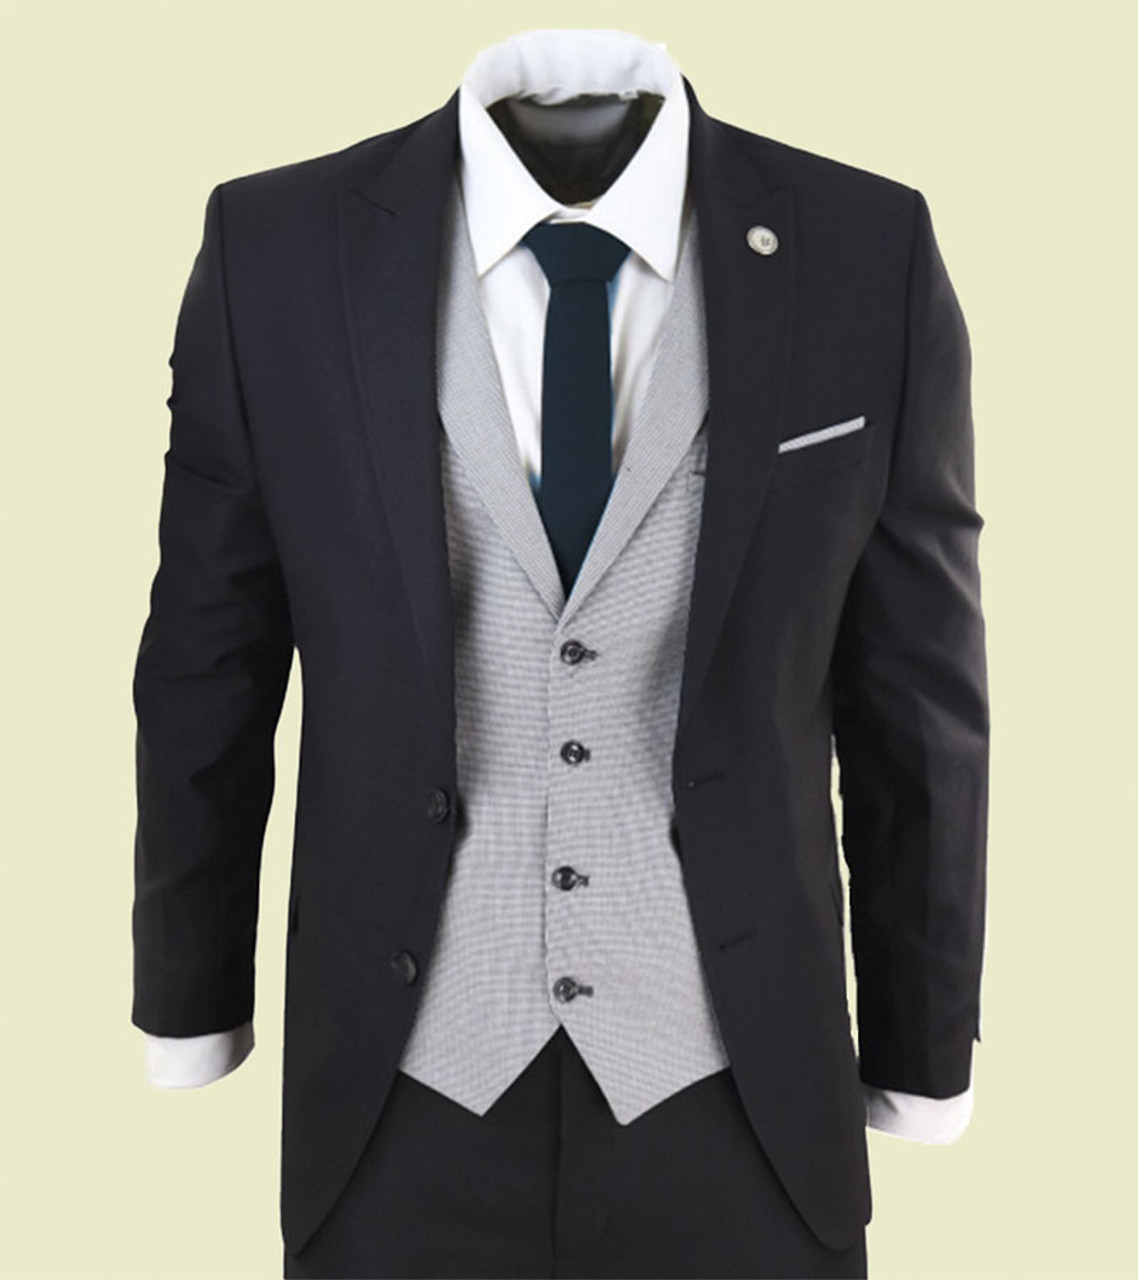 Get Now Mens Blue Wedding Suit ✔️ Free Shipping Worldwide